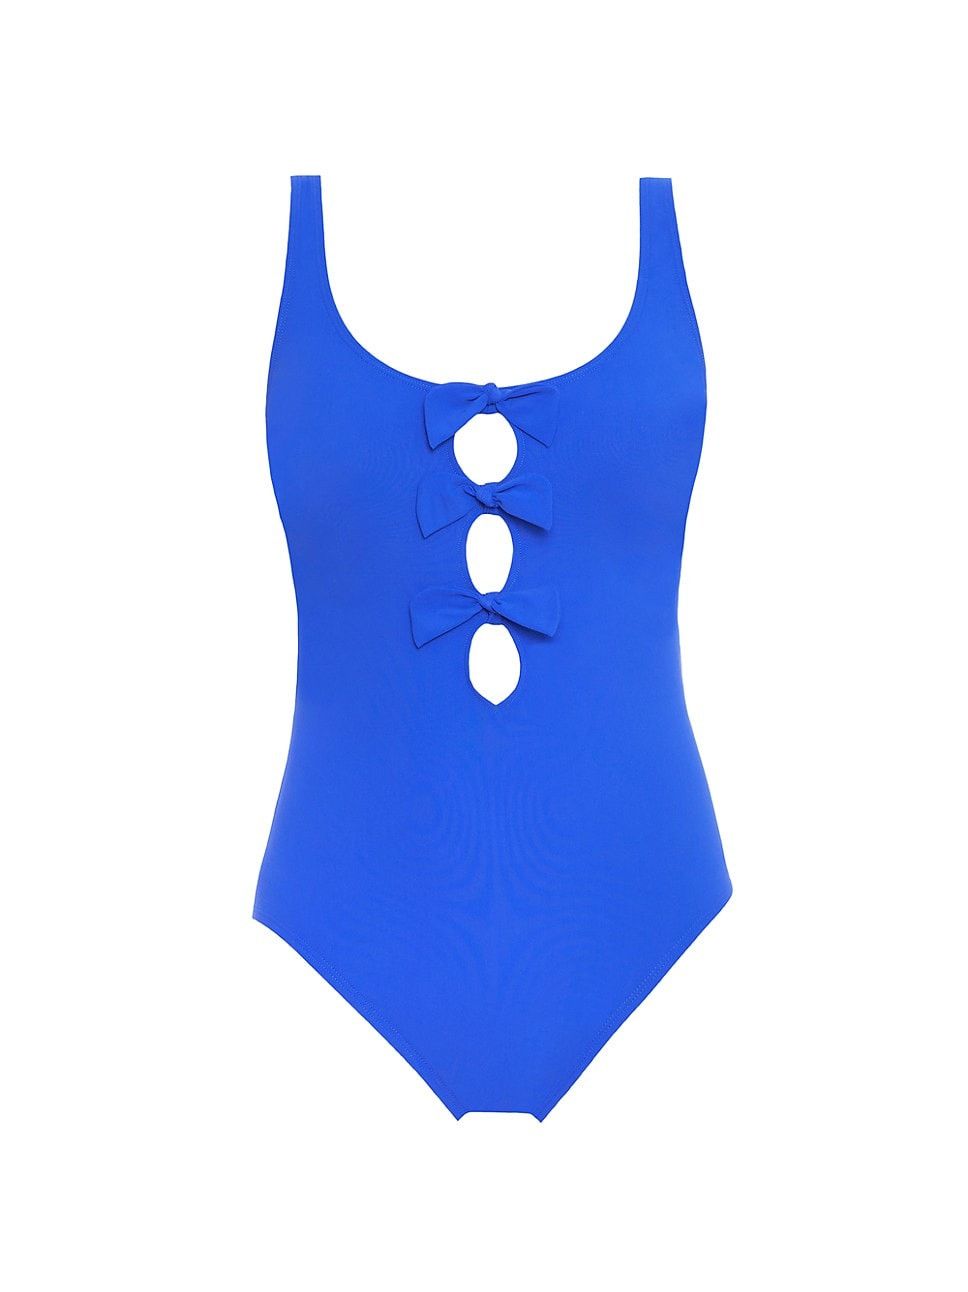 Jelly Beans Alysa Bow One-Piece Swimsuit | Saks Fifth Avenue